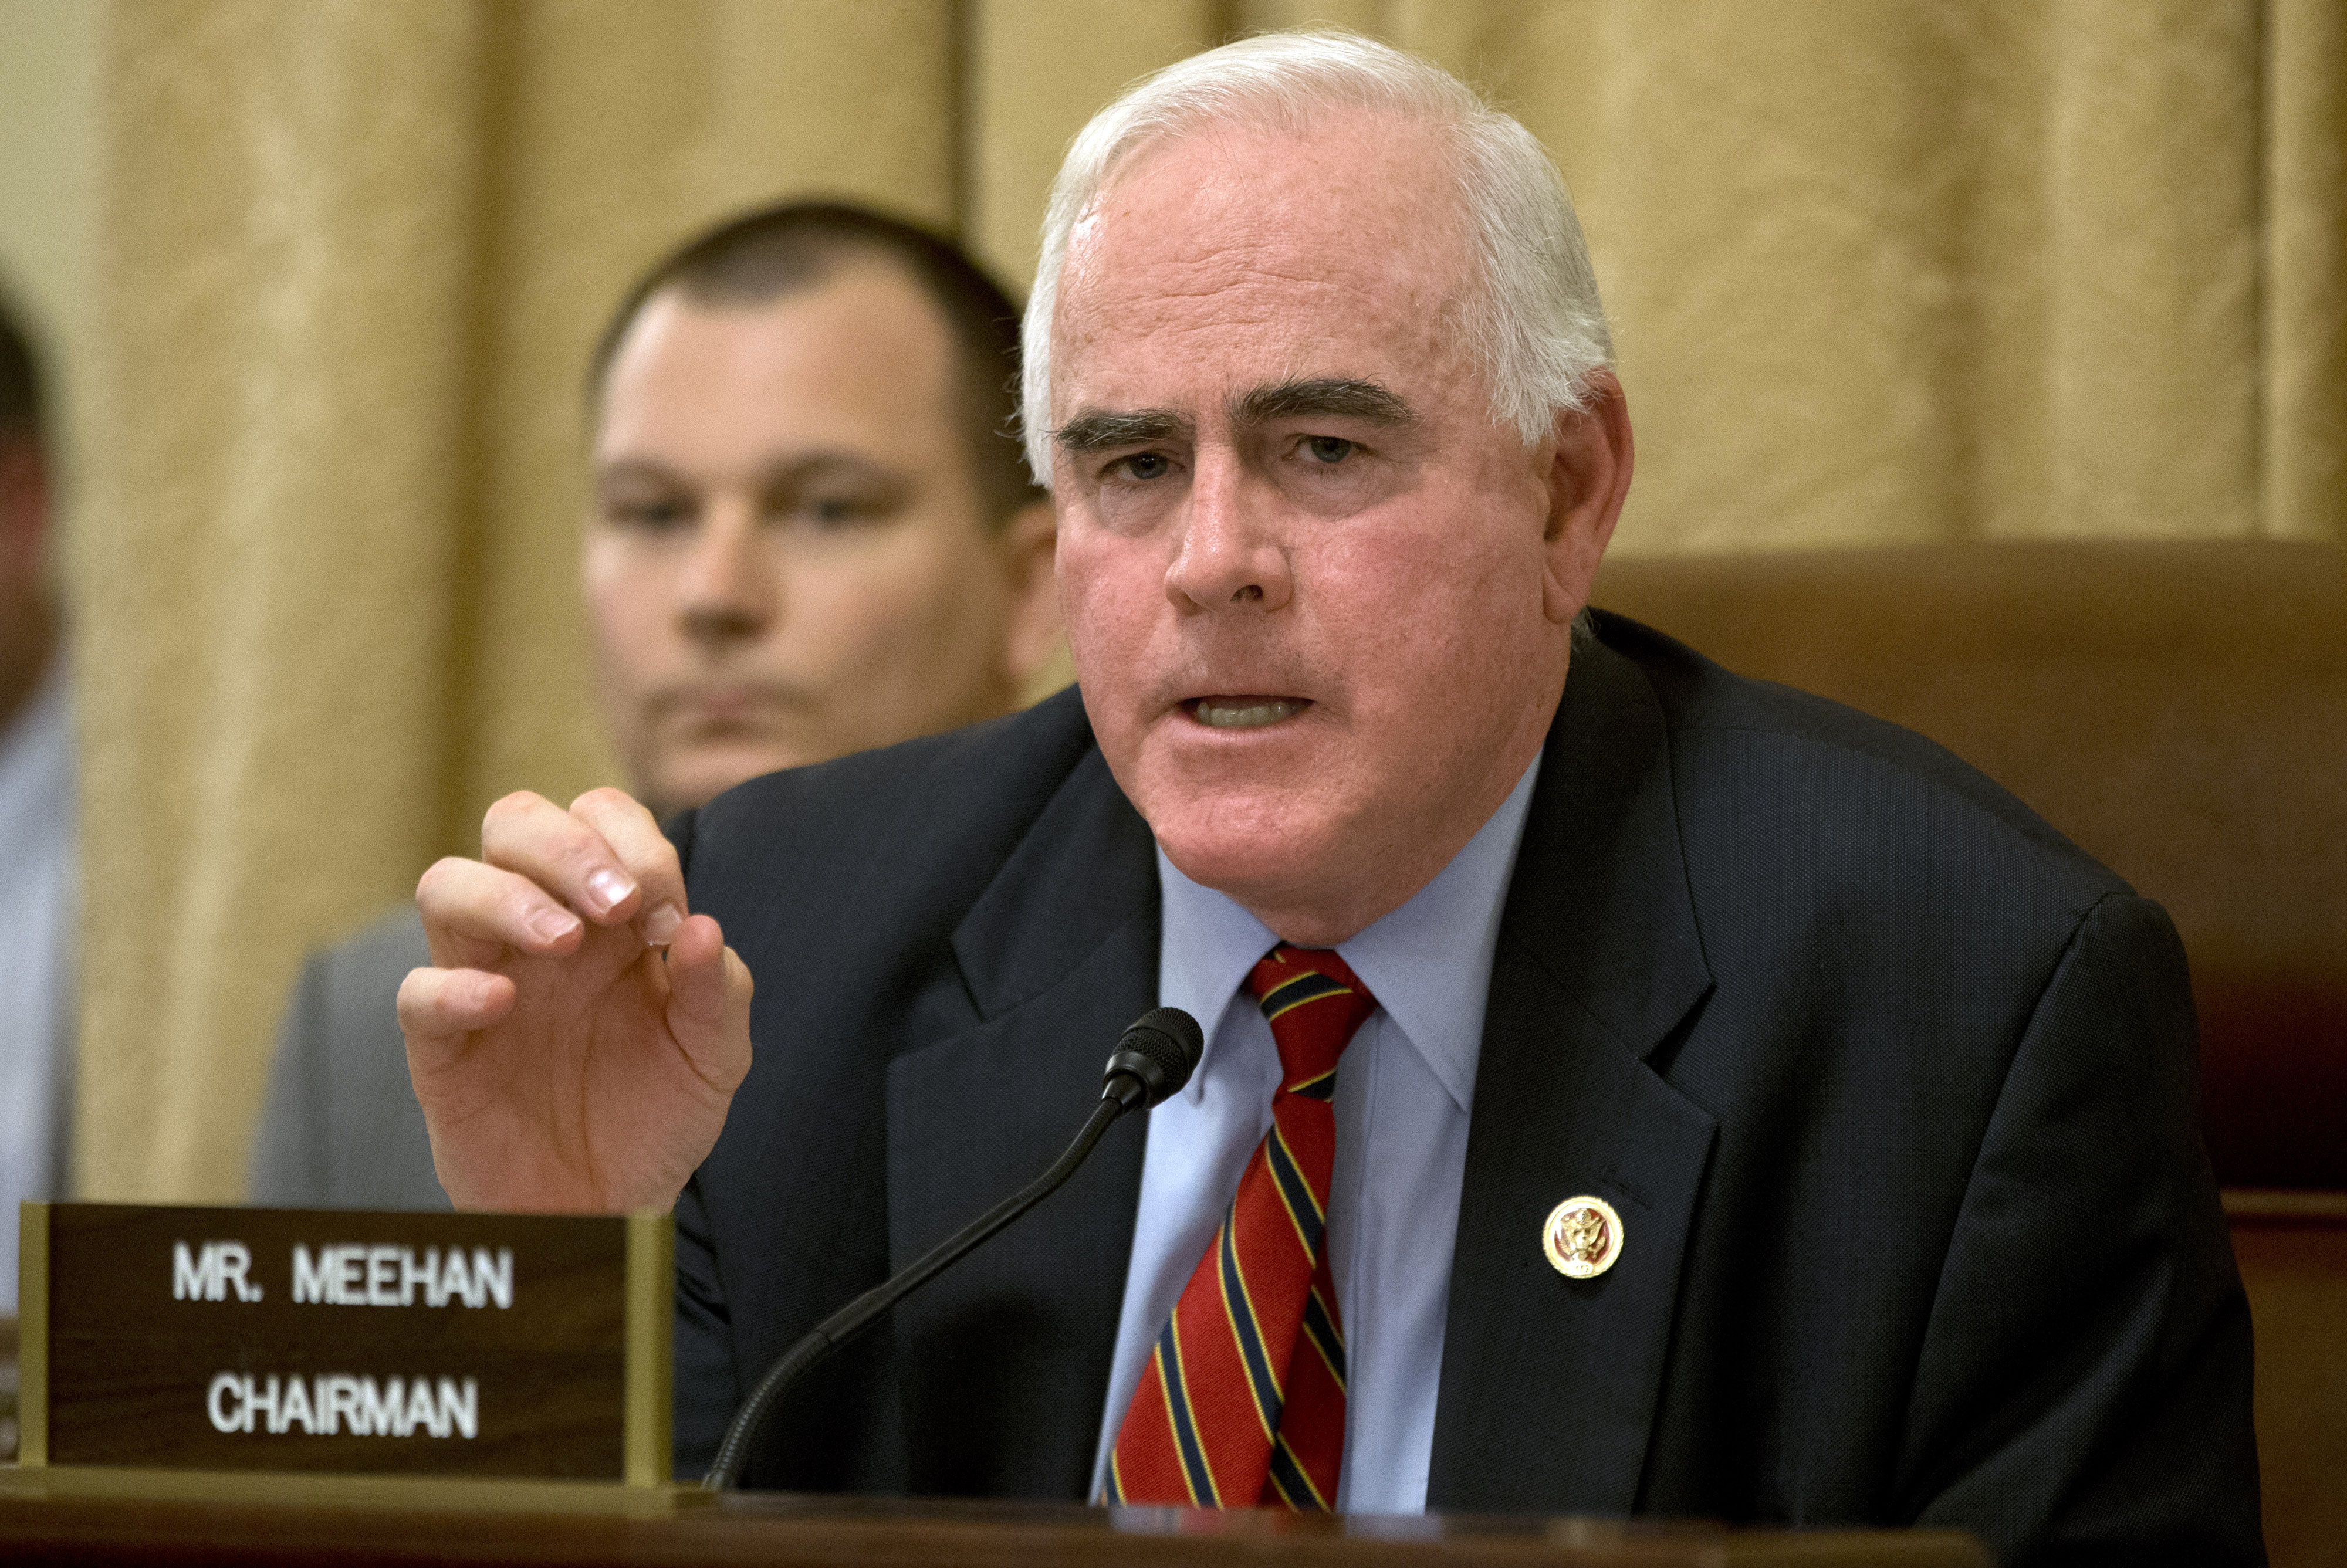 Rep. Patrick Meehan, R-Pa. on Capitol Hill in Washington on March 20, 2013 (Jacquelyn Martin—AP)